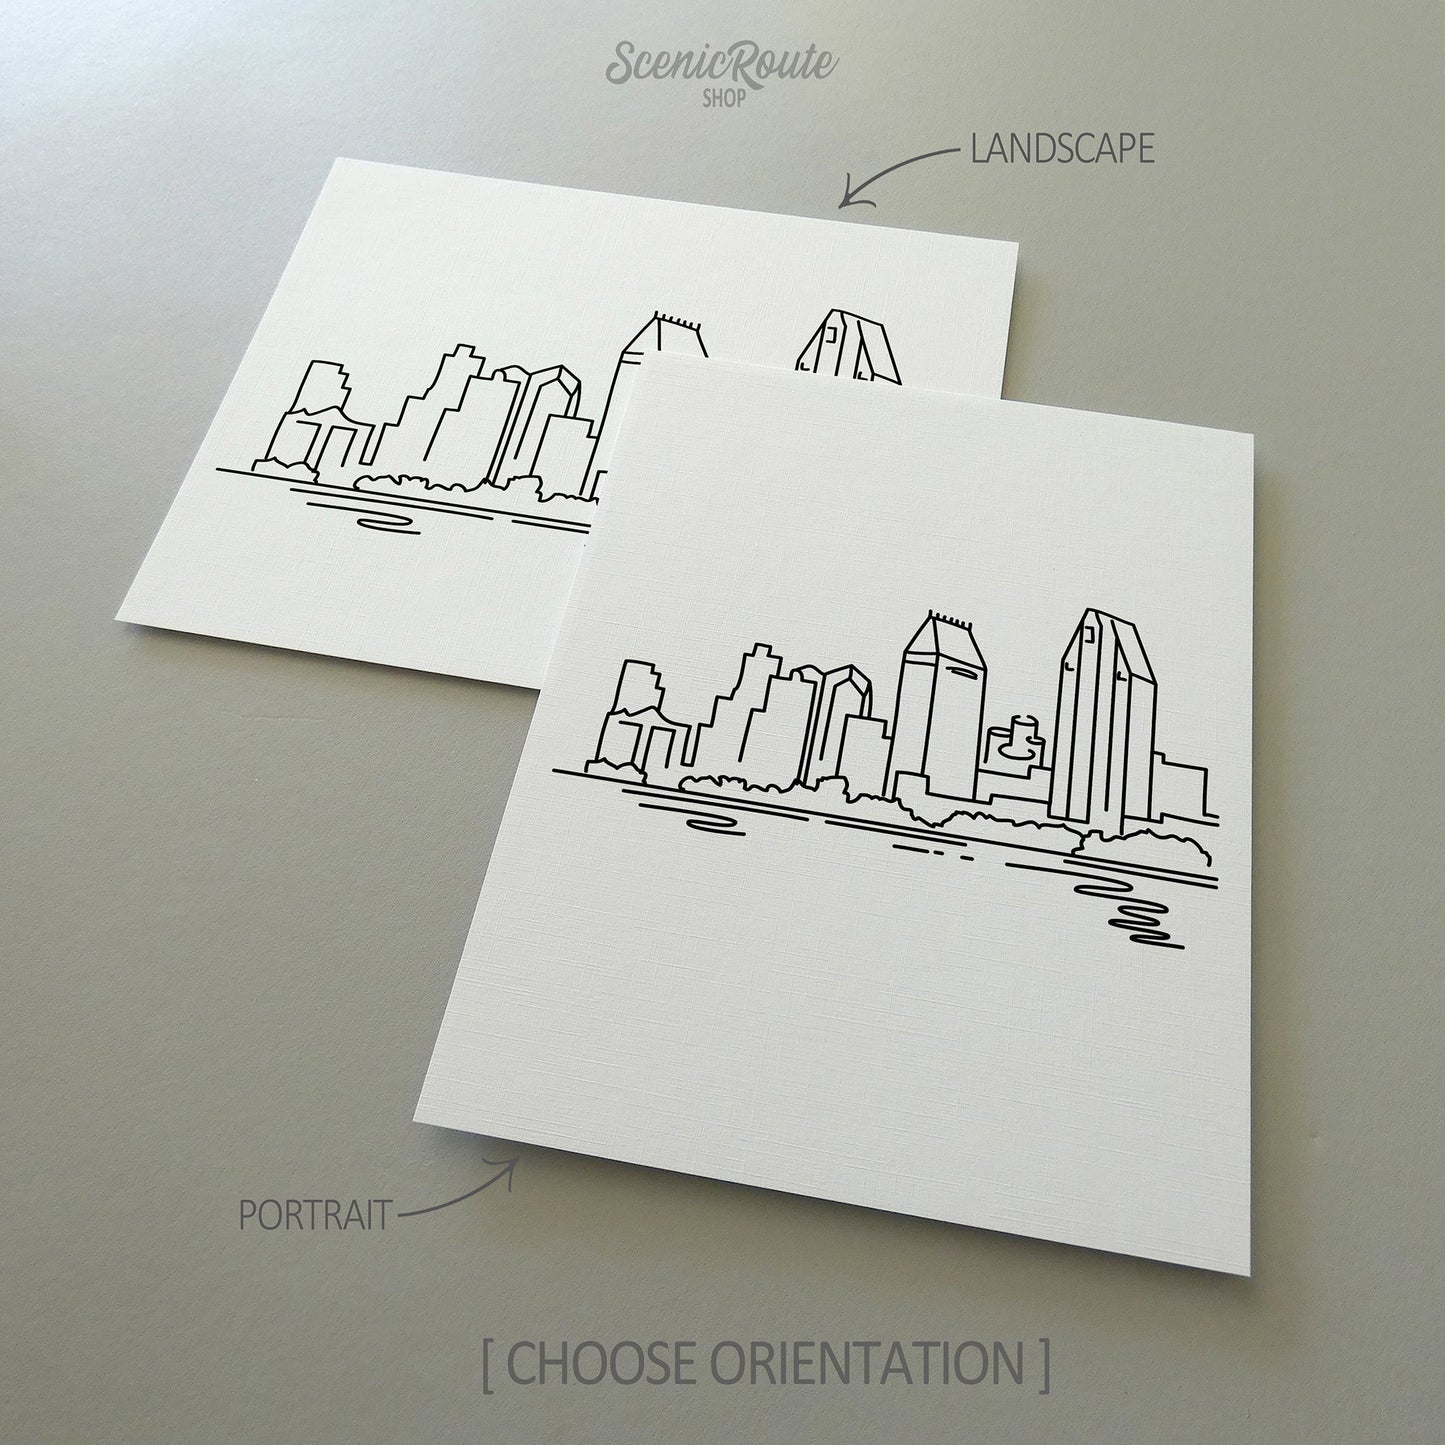 Two line art drawings of the San Diego Skyline on white linen paper with a gray background.  The pieces are shown in portrait and landscape orientation for the available art print options.